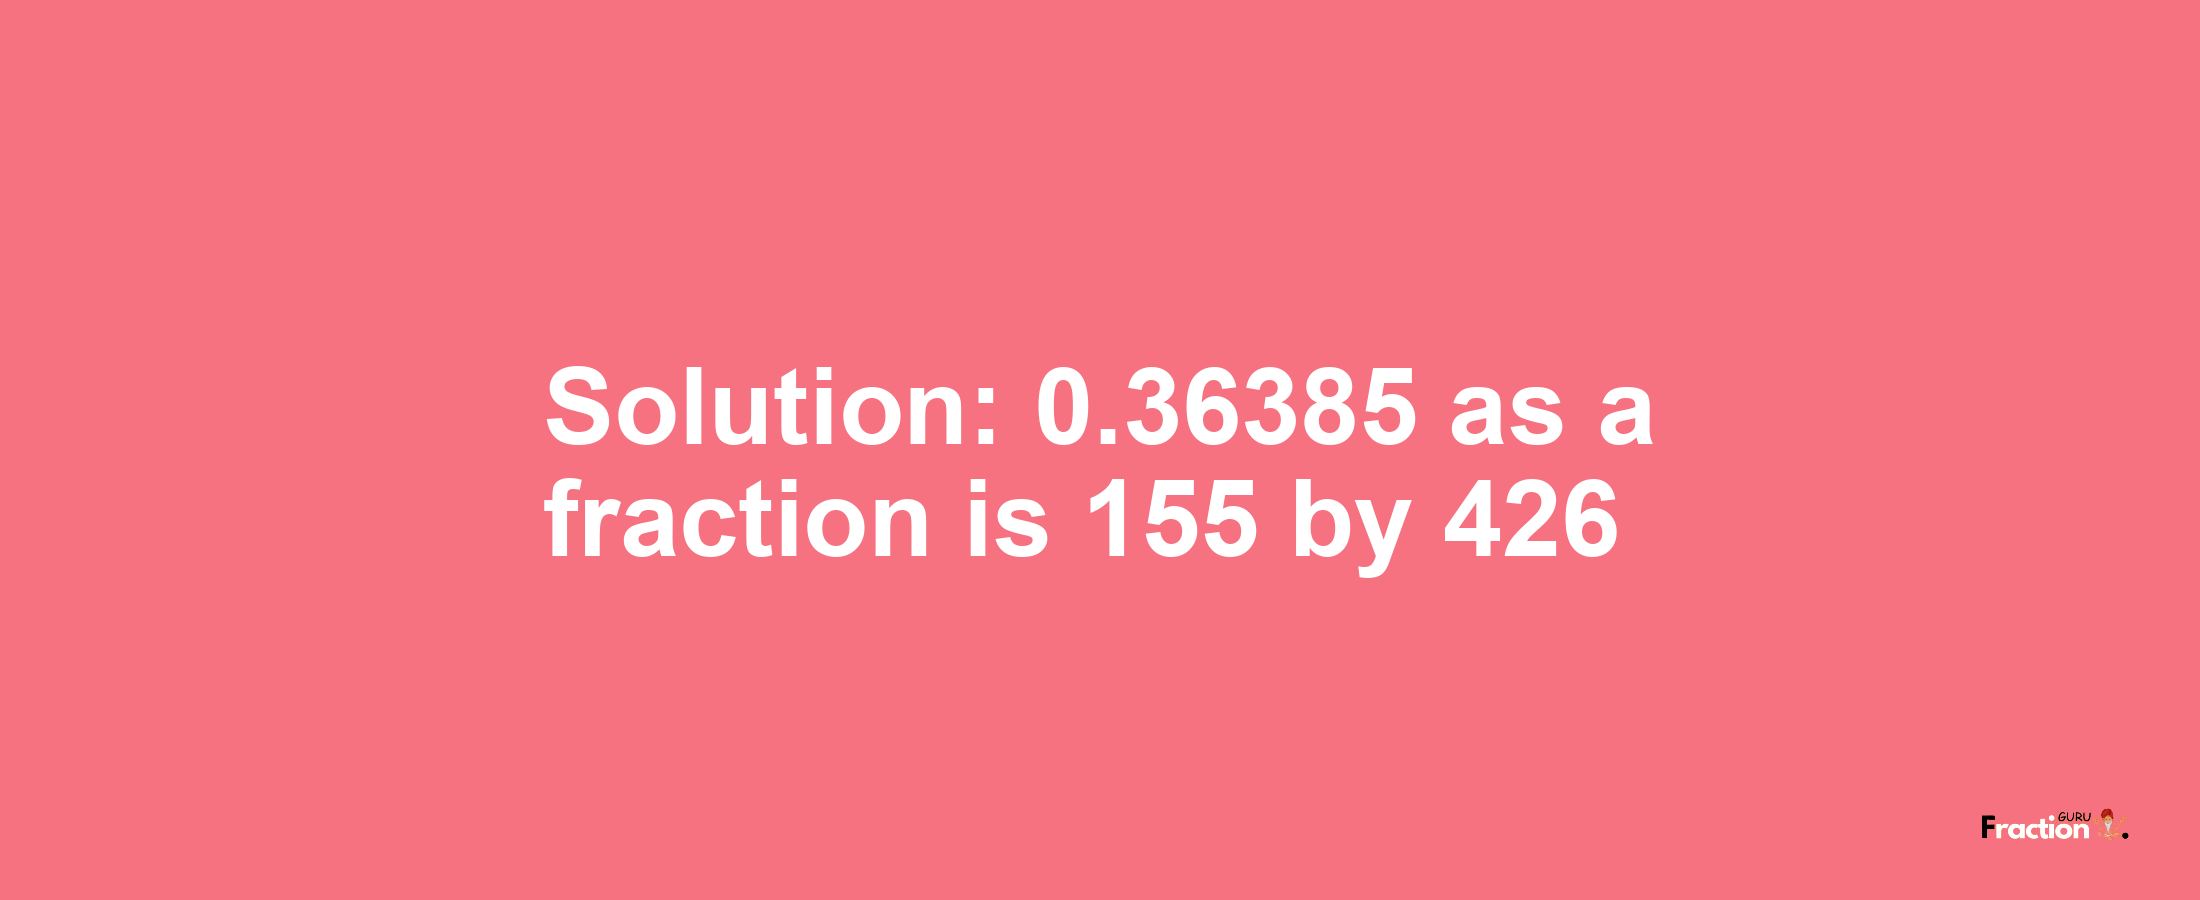 Solution:0.36385 as a fraction is 155/426